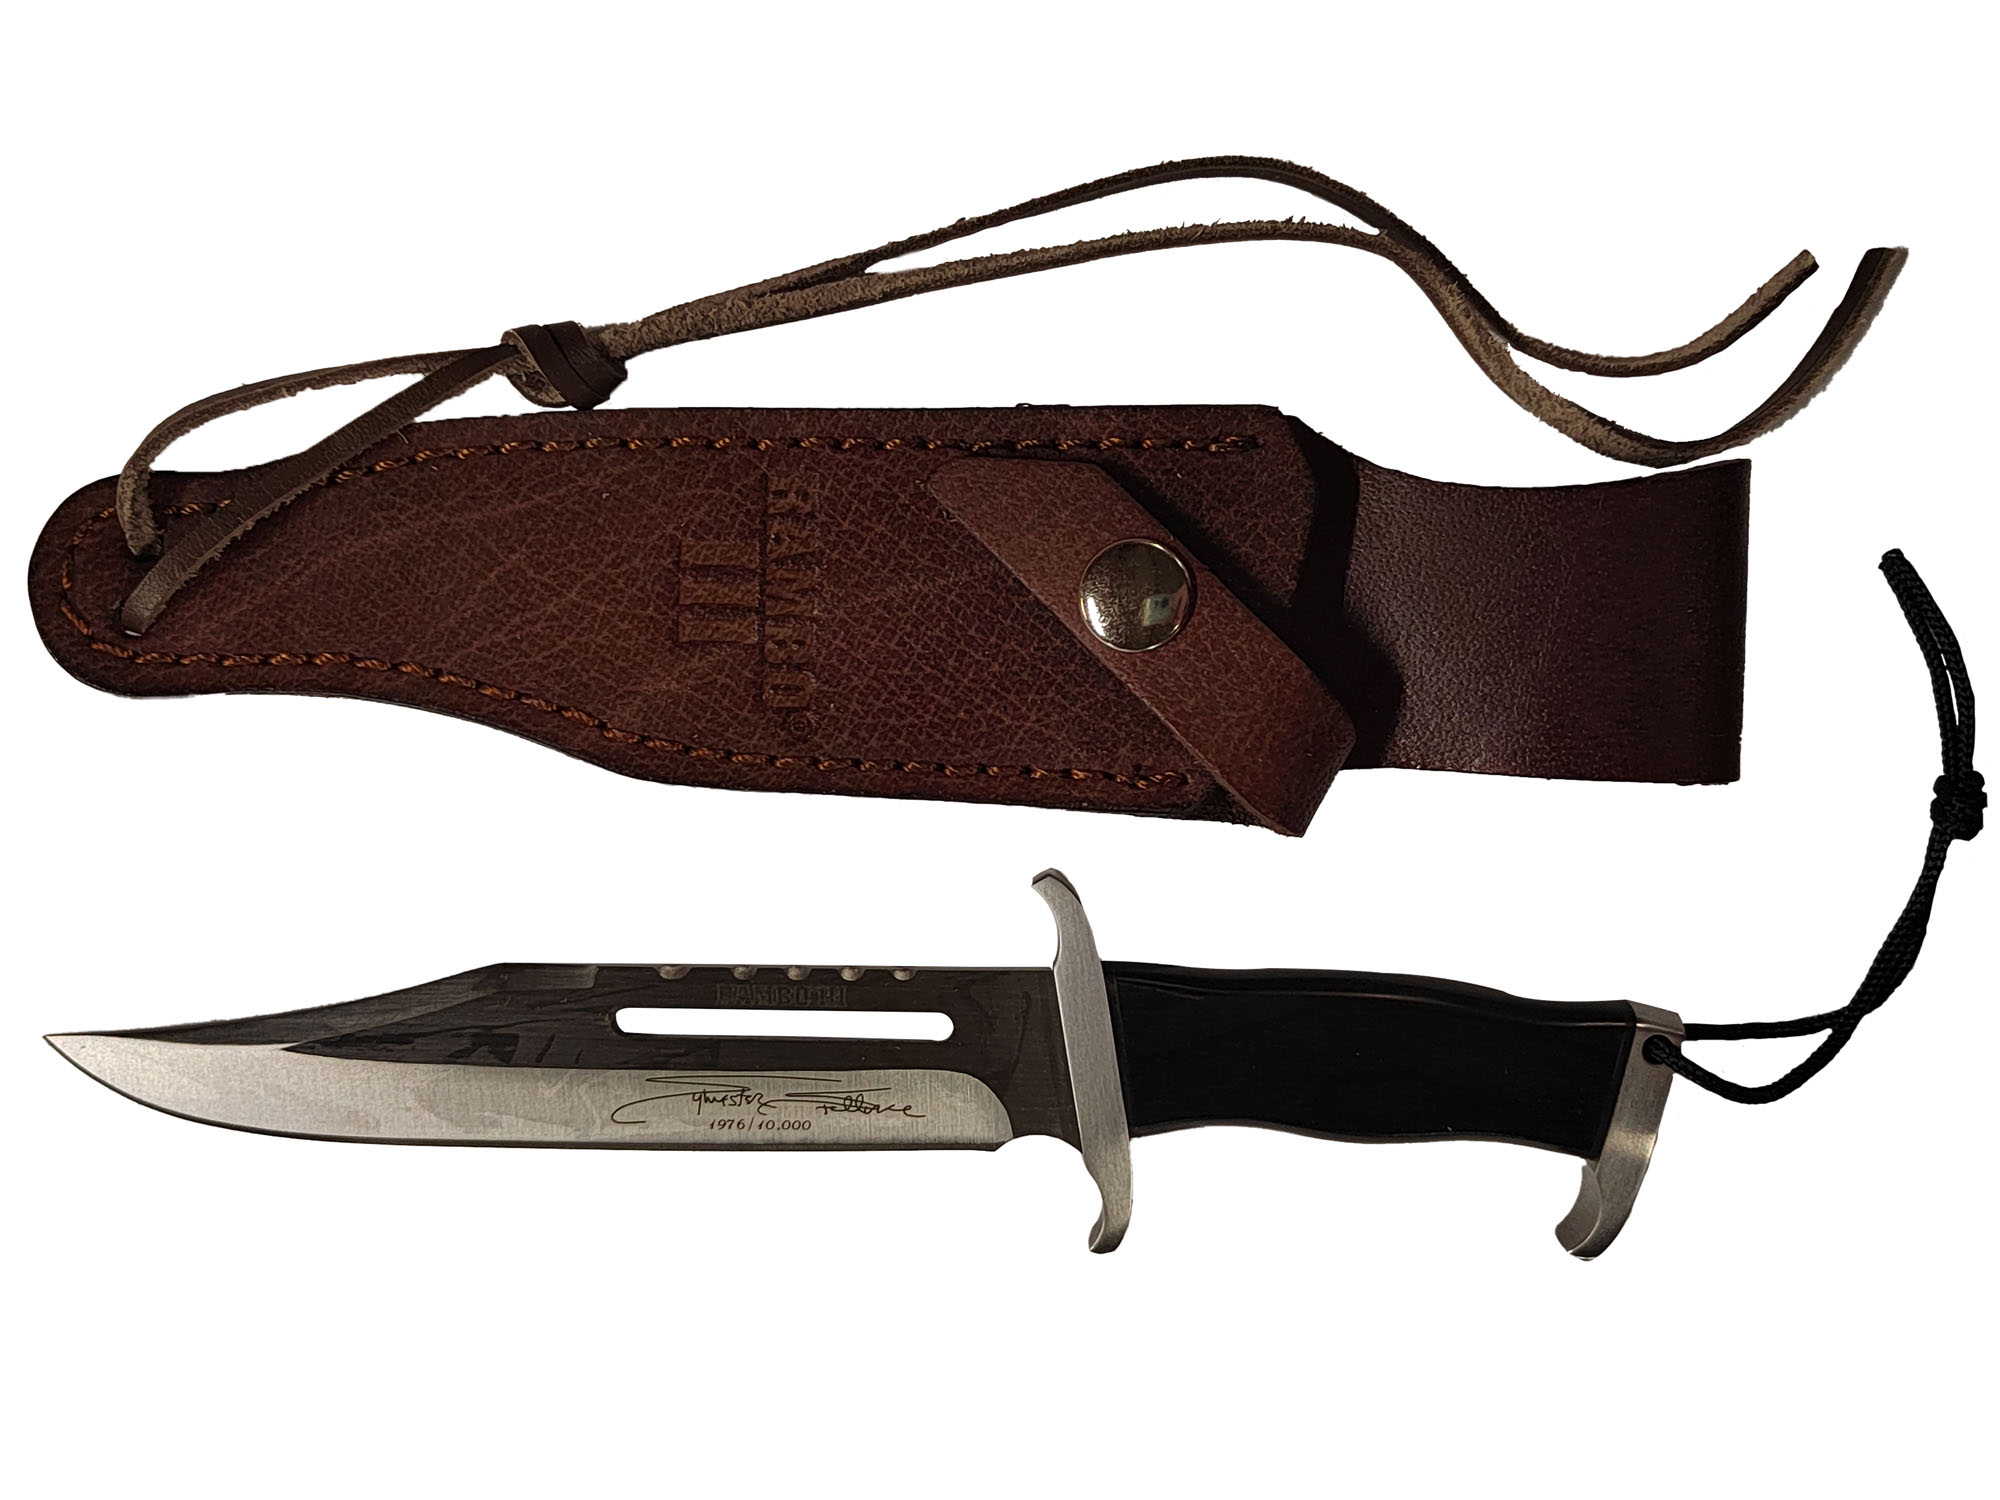 Rambo III Mini Bowie Messer - Limited Edition